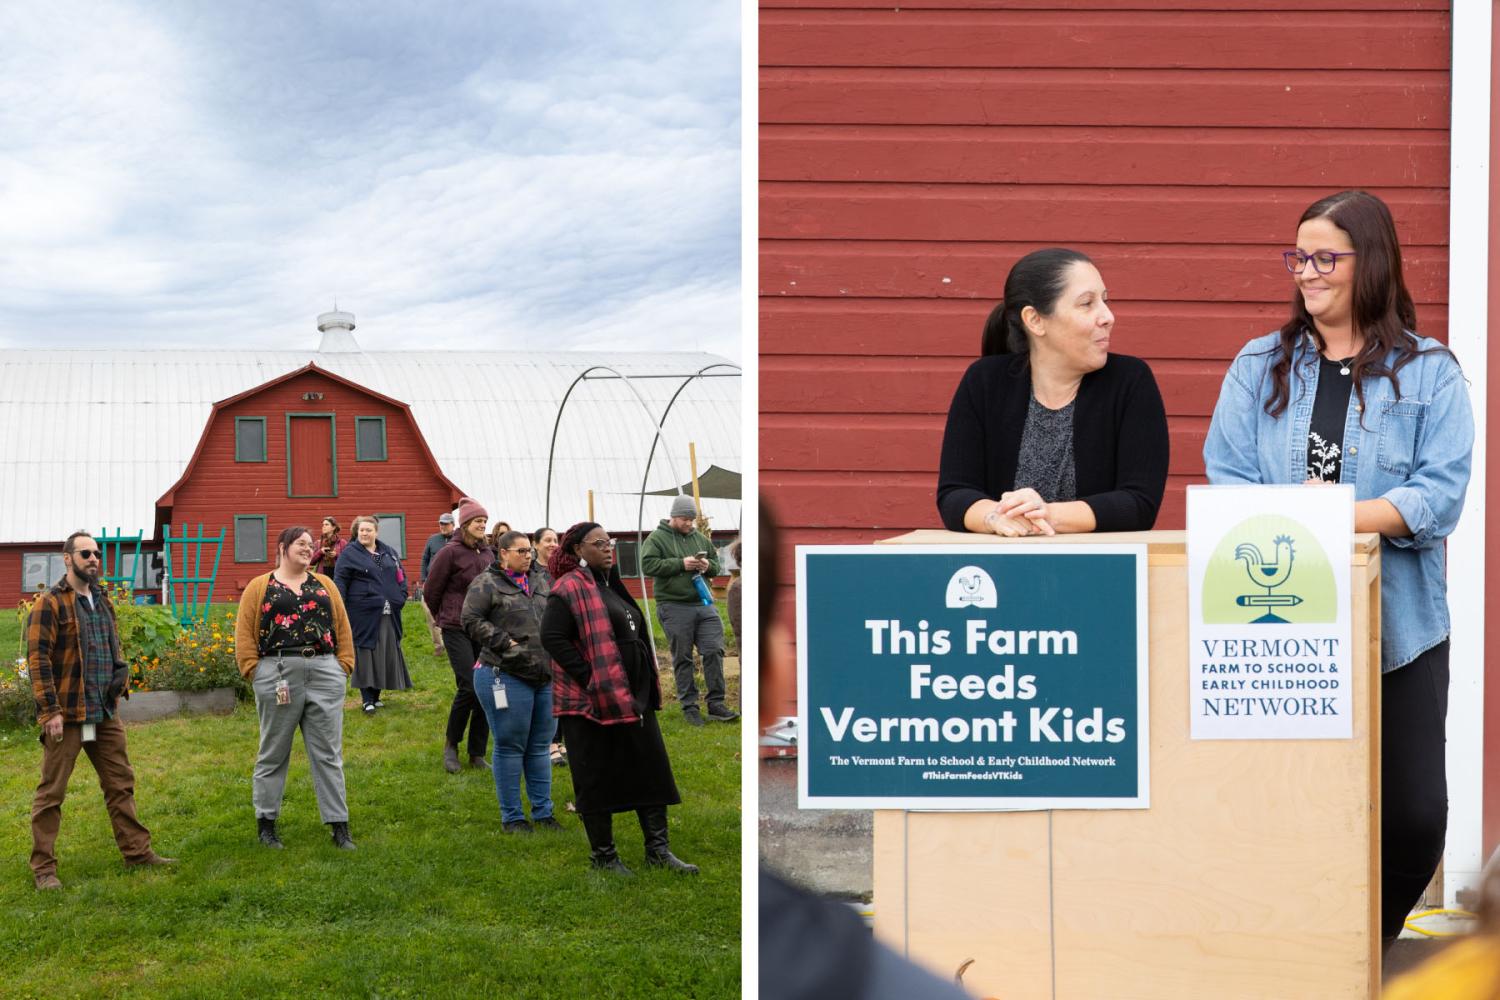 Two images. Left: adults tour a school garden, a red barn in the background. Right: staff stand at a podium, sharing the school's story.